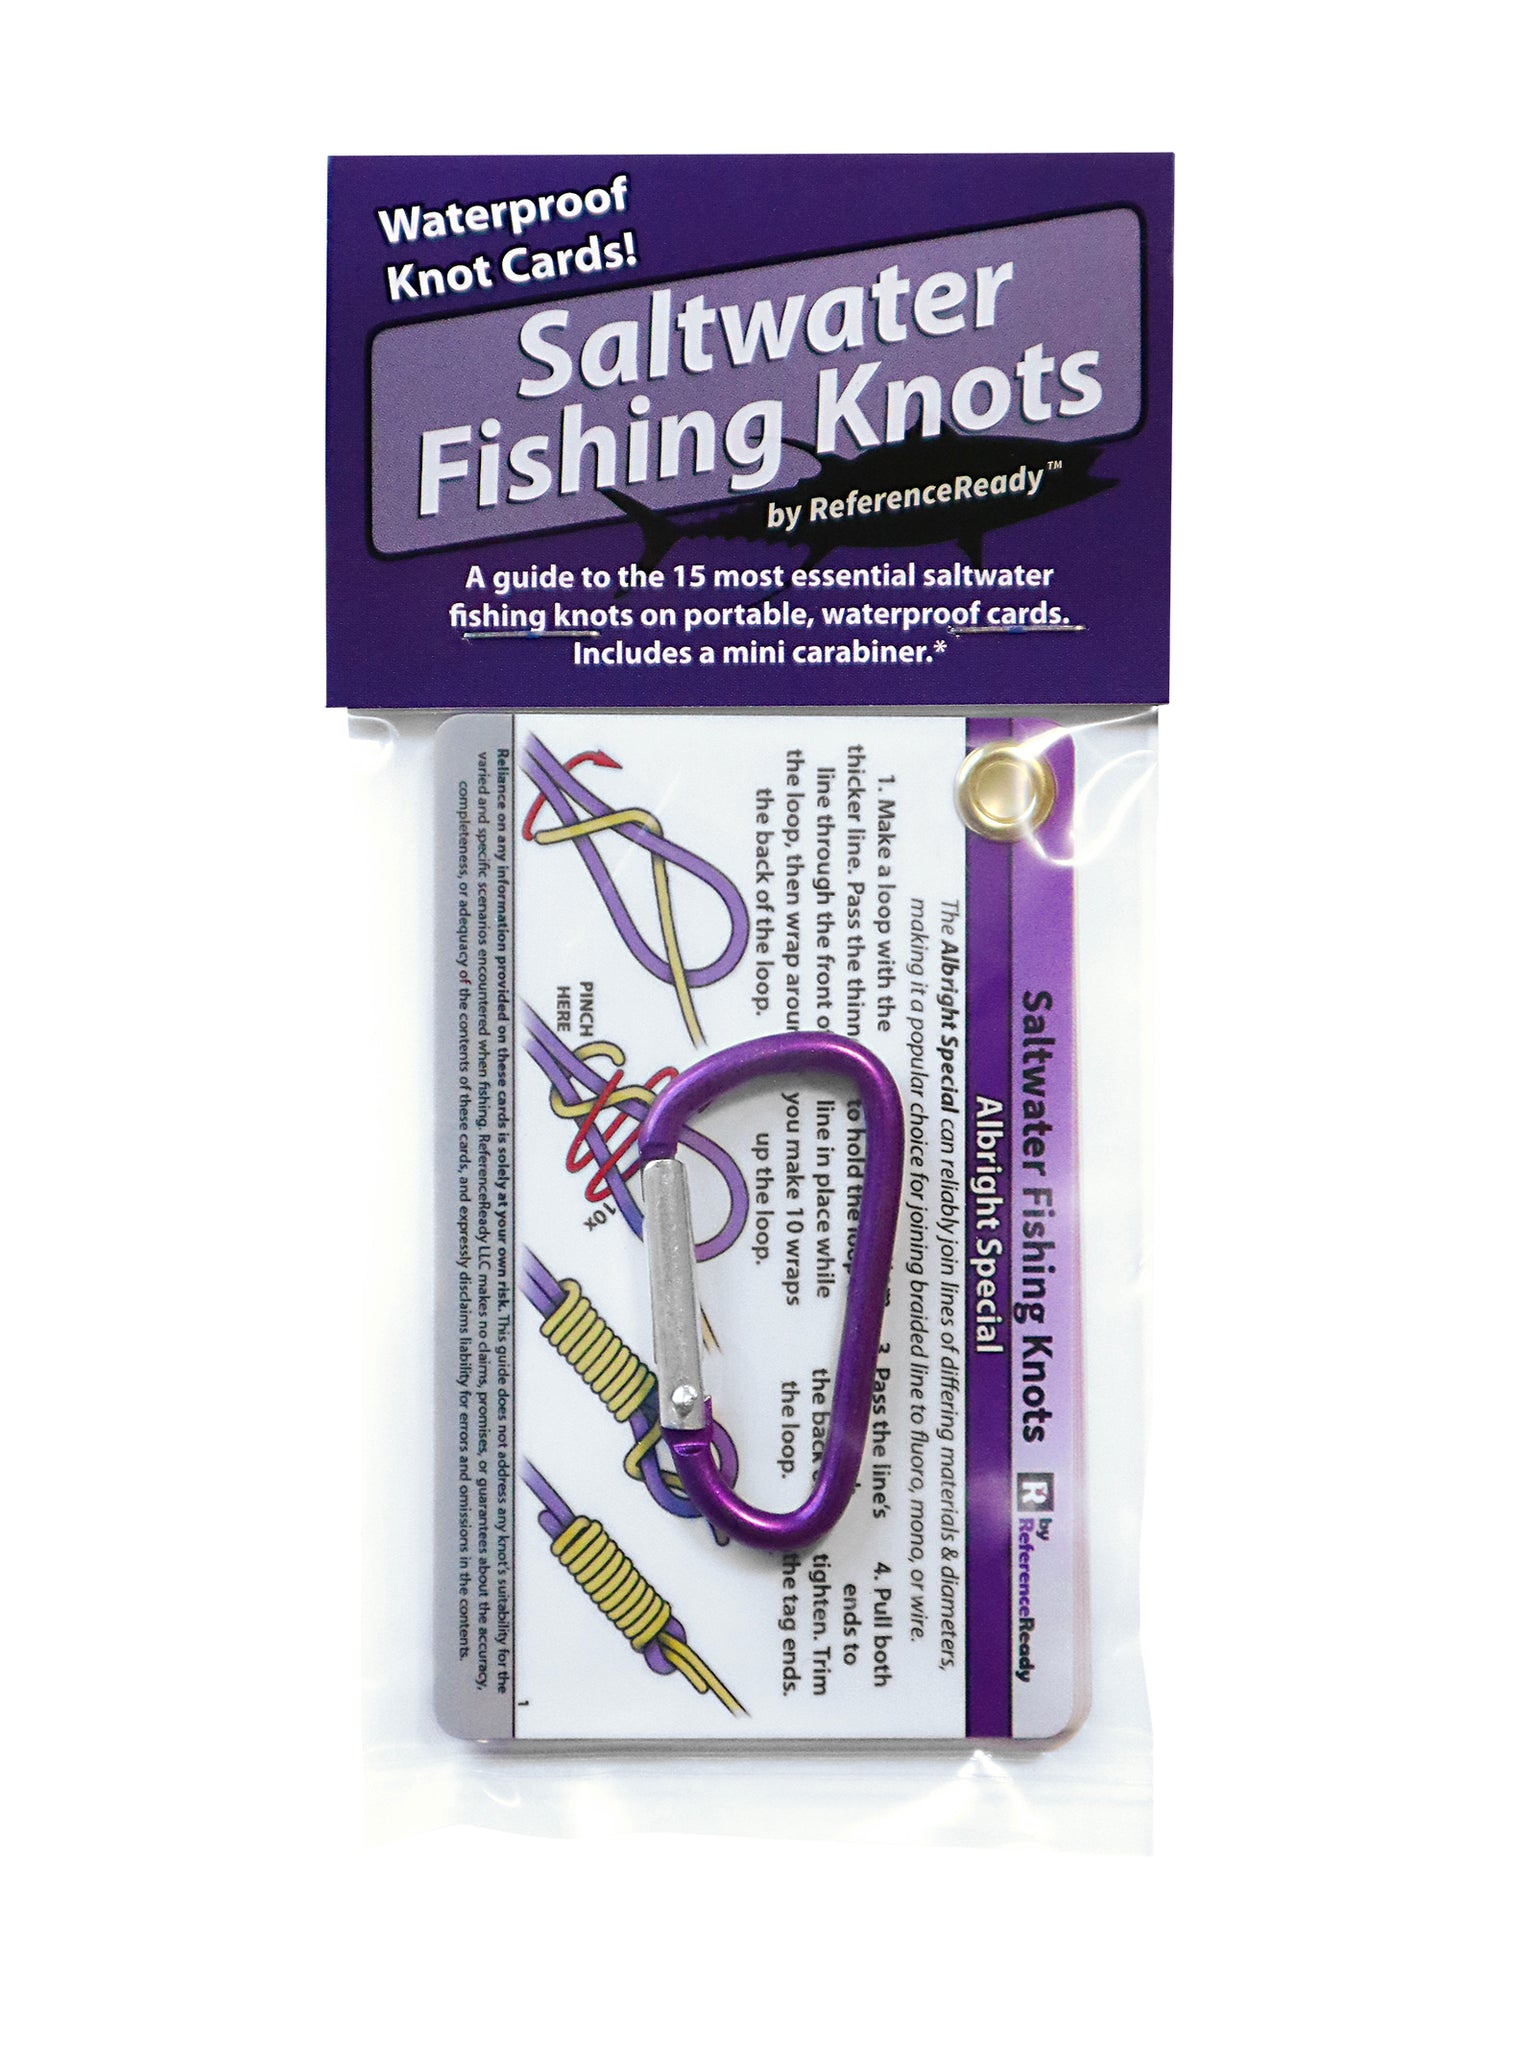 Saltwater Fishing Waterproof Knot Cards – ReferenceReady